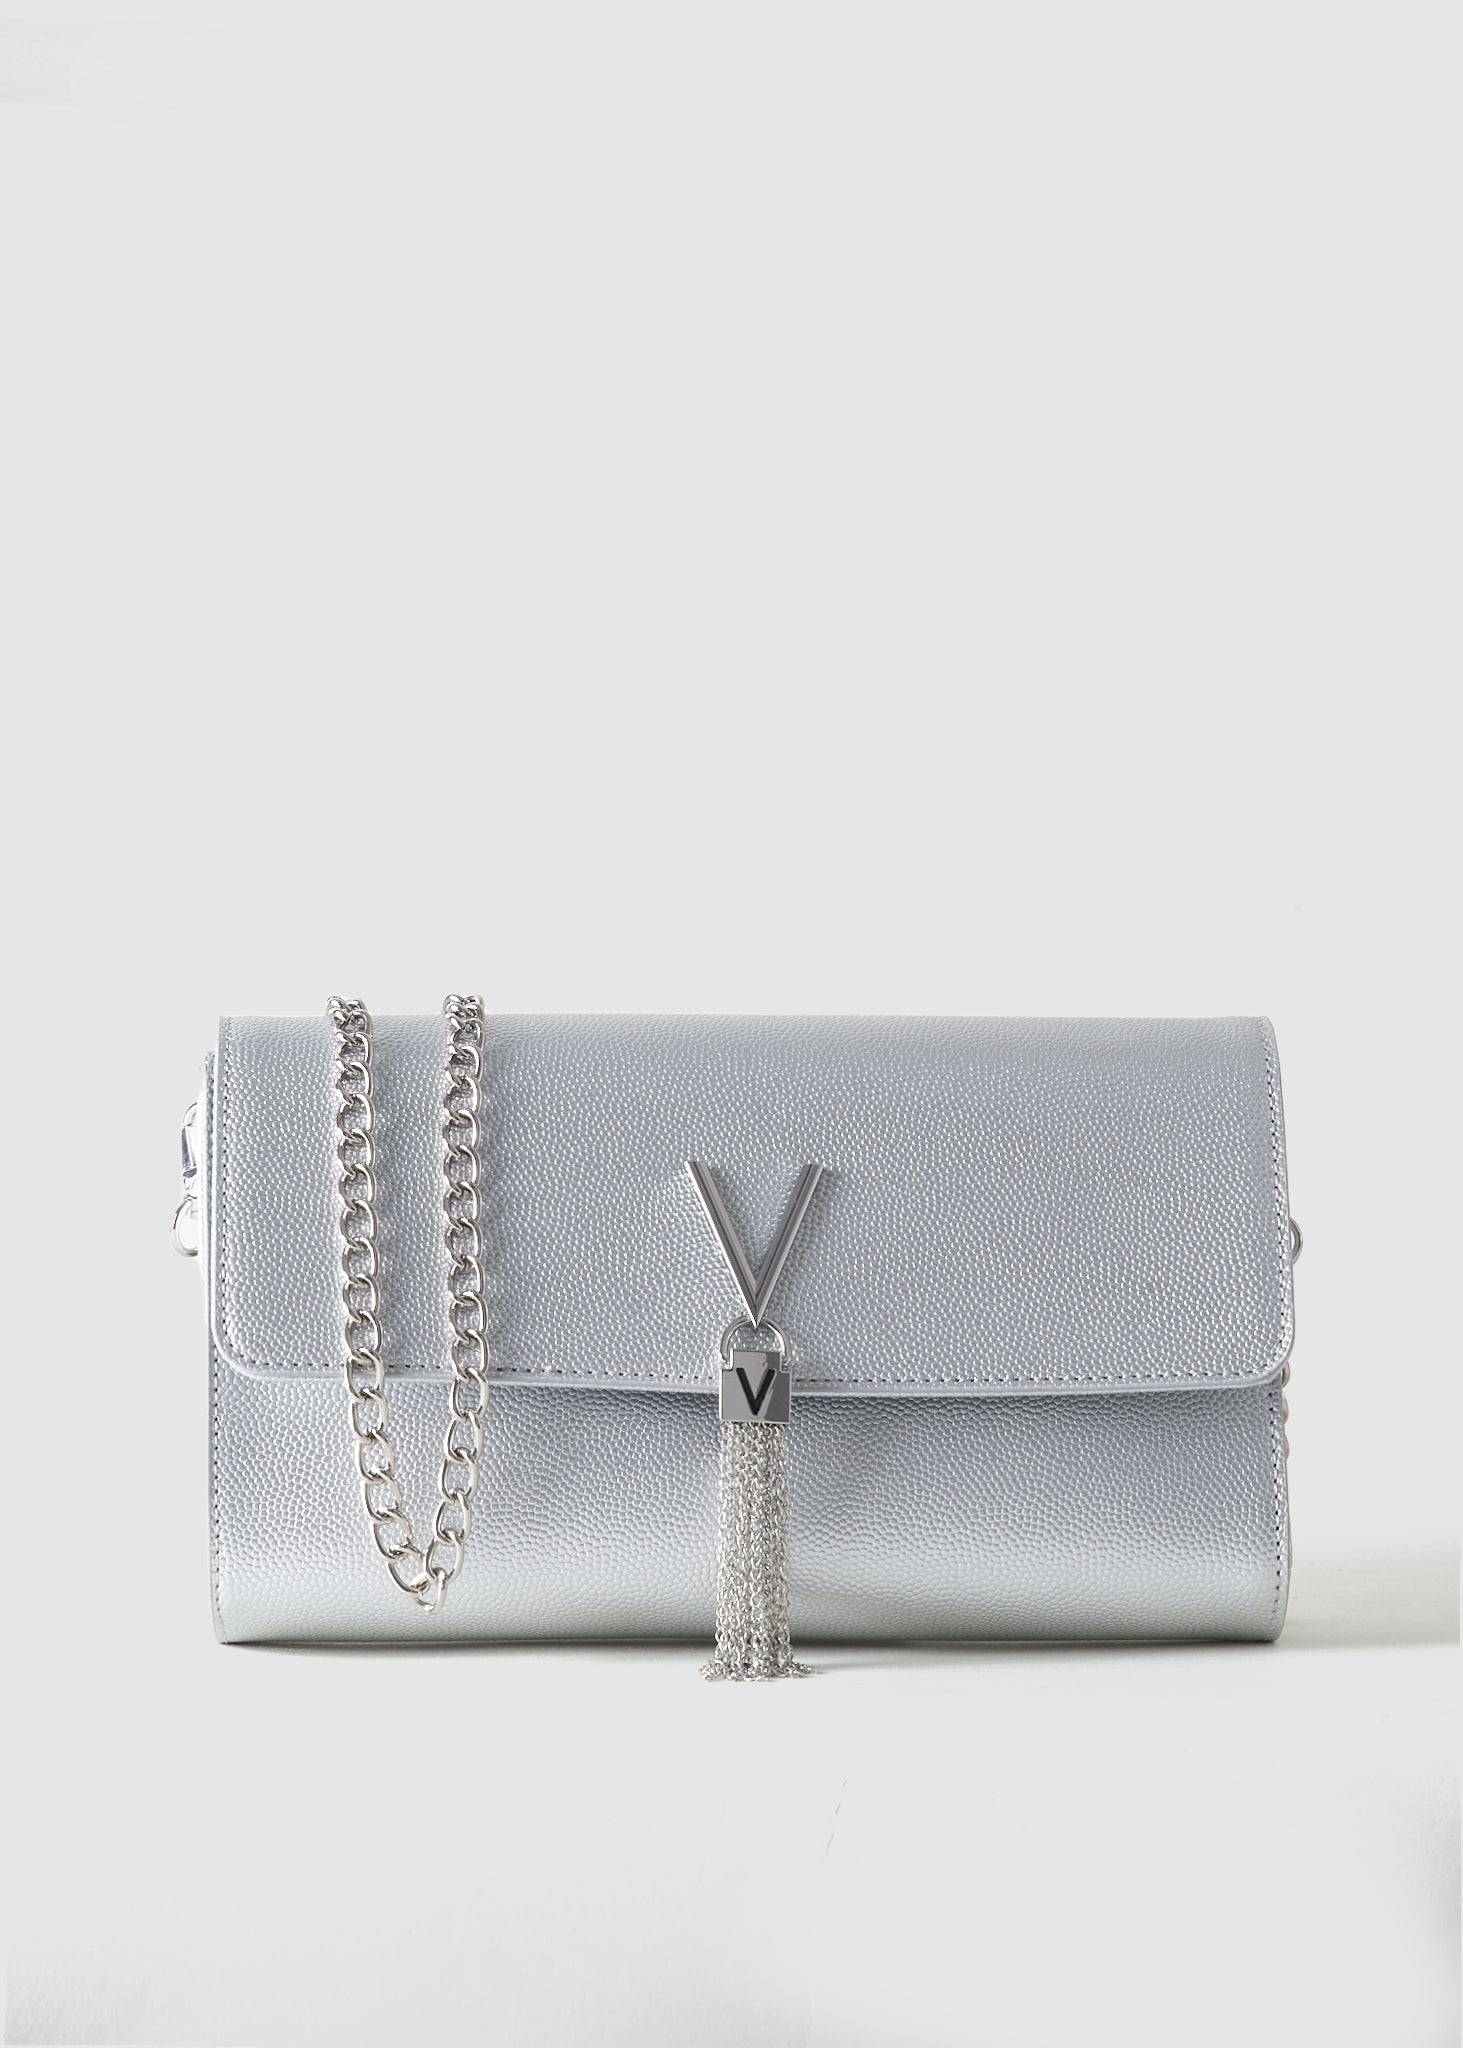 Valentino Bags Womens Divina Fold Over Clutch Bag With Chain Strap In Argento